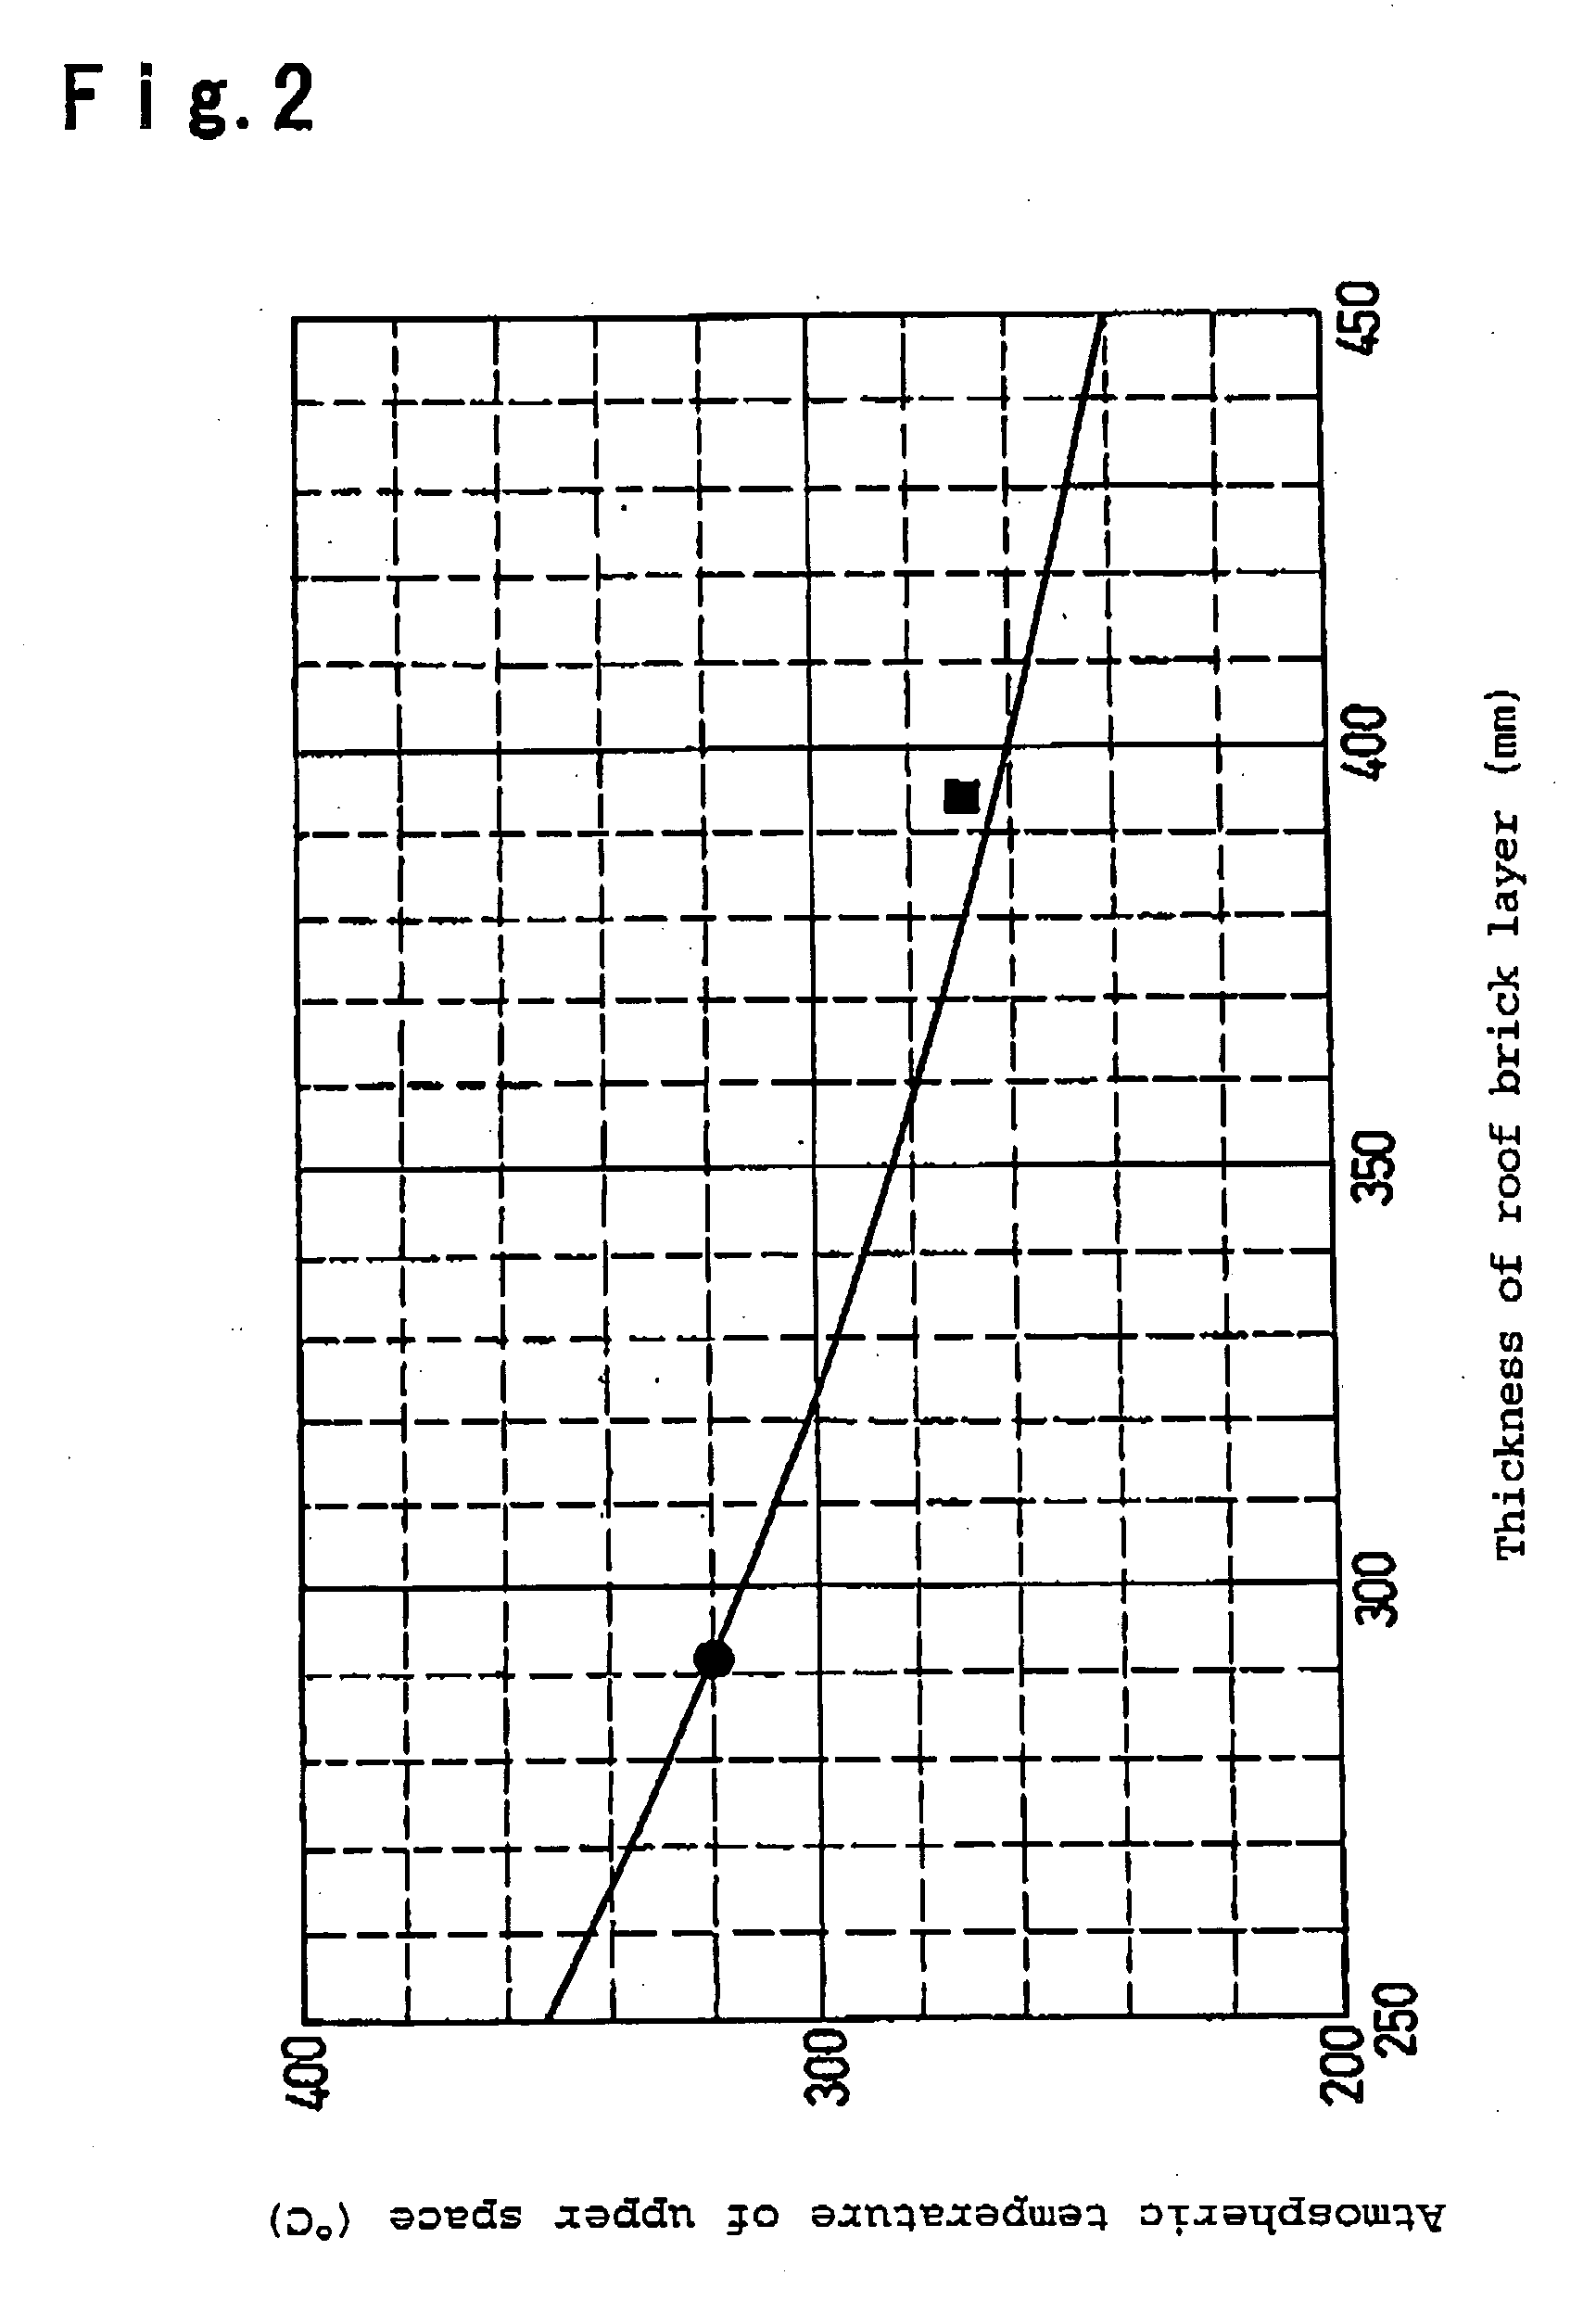 Float bath and float forming method